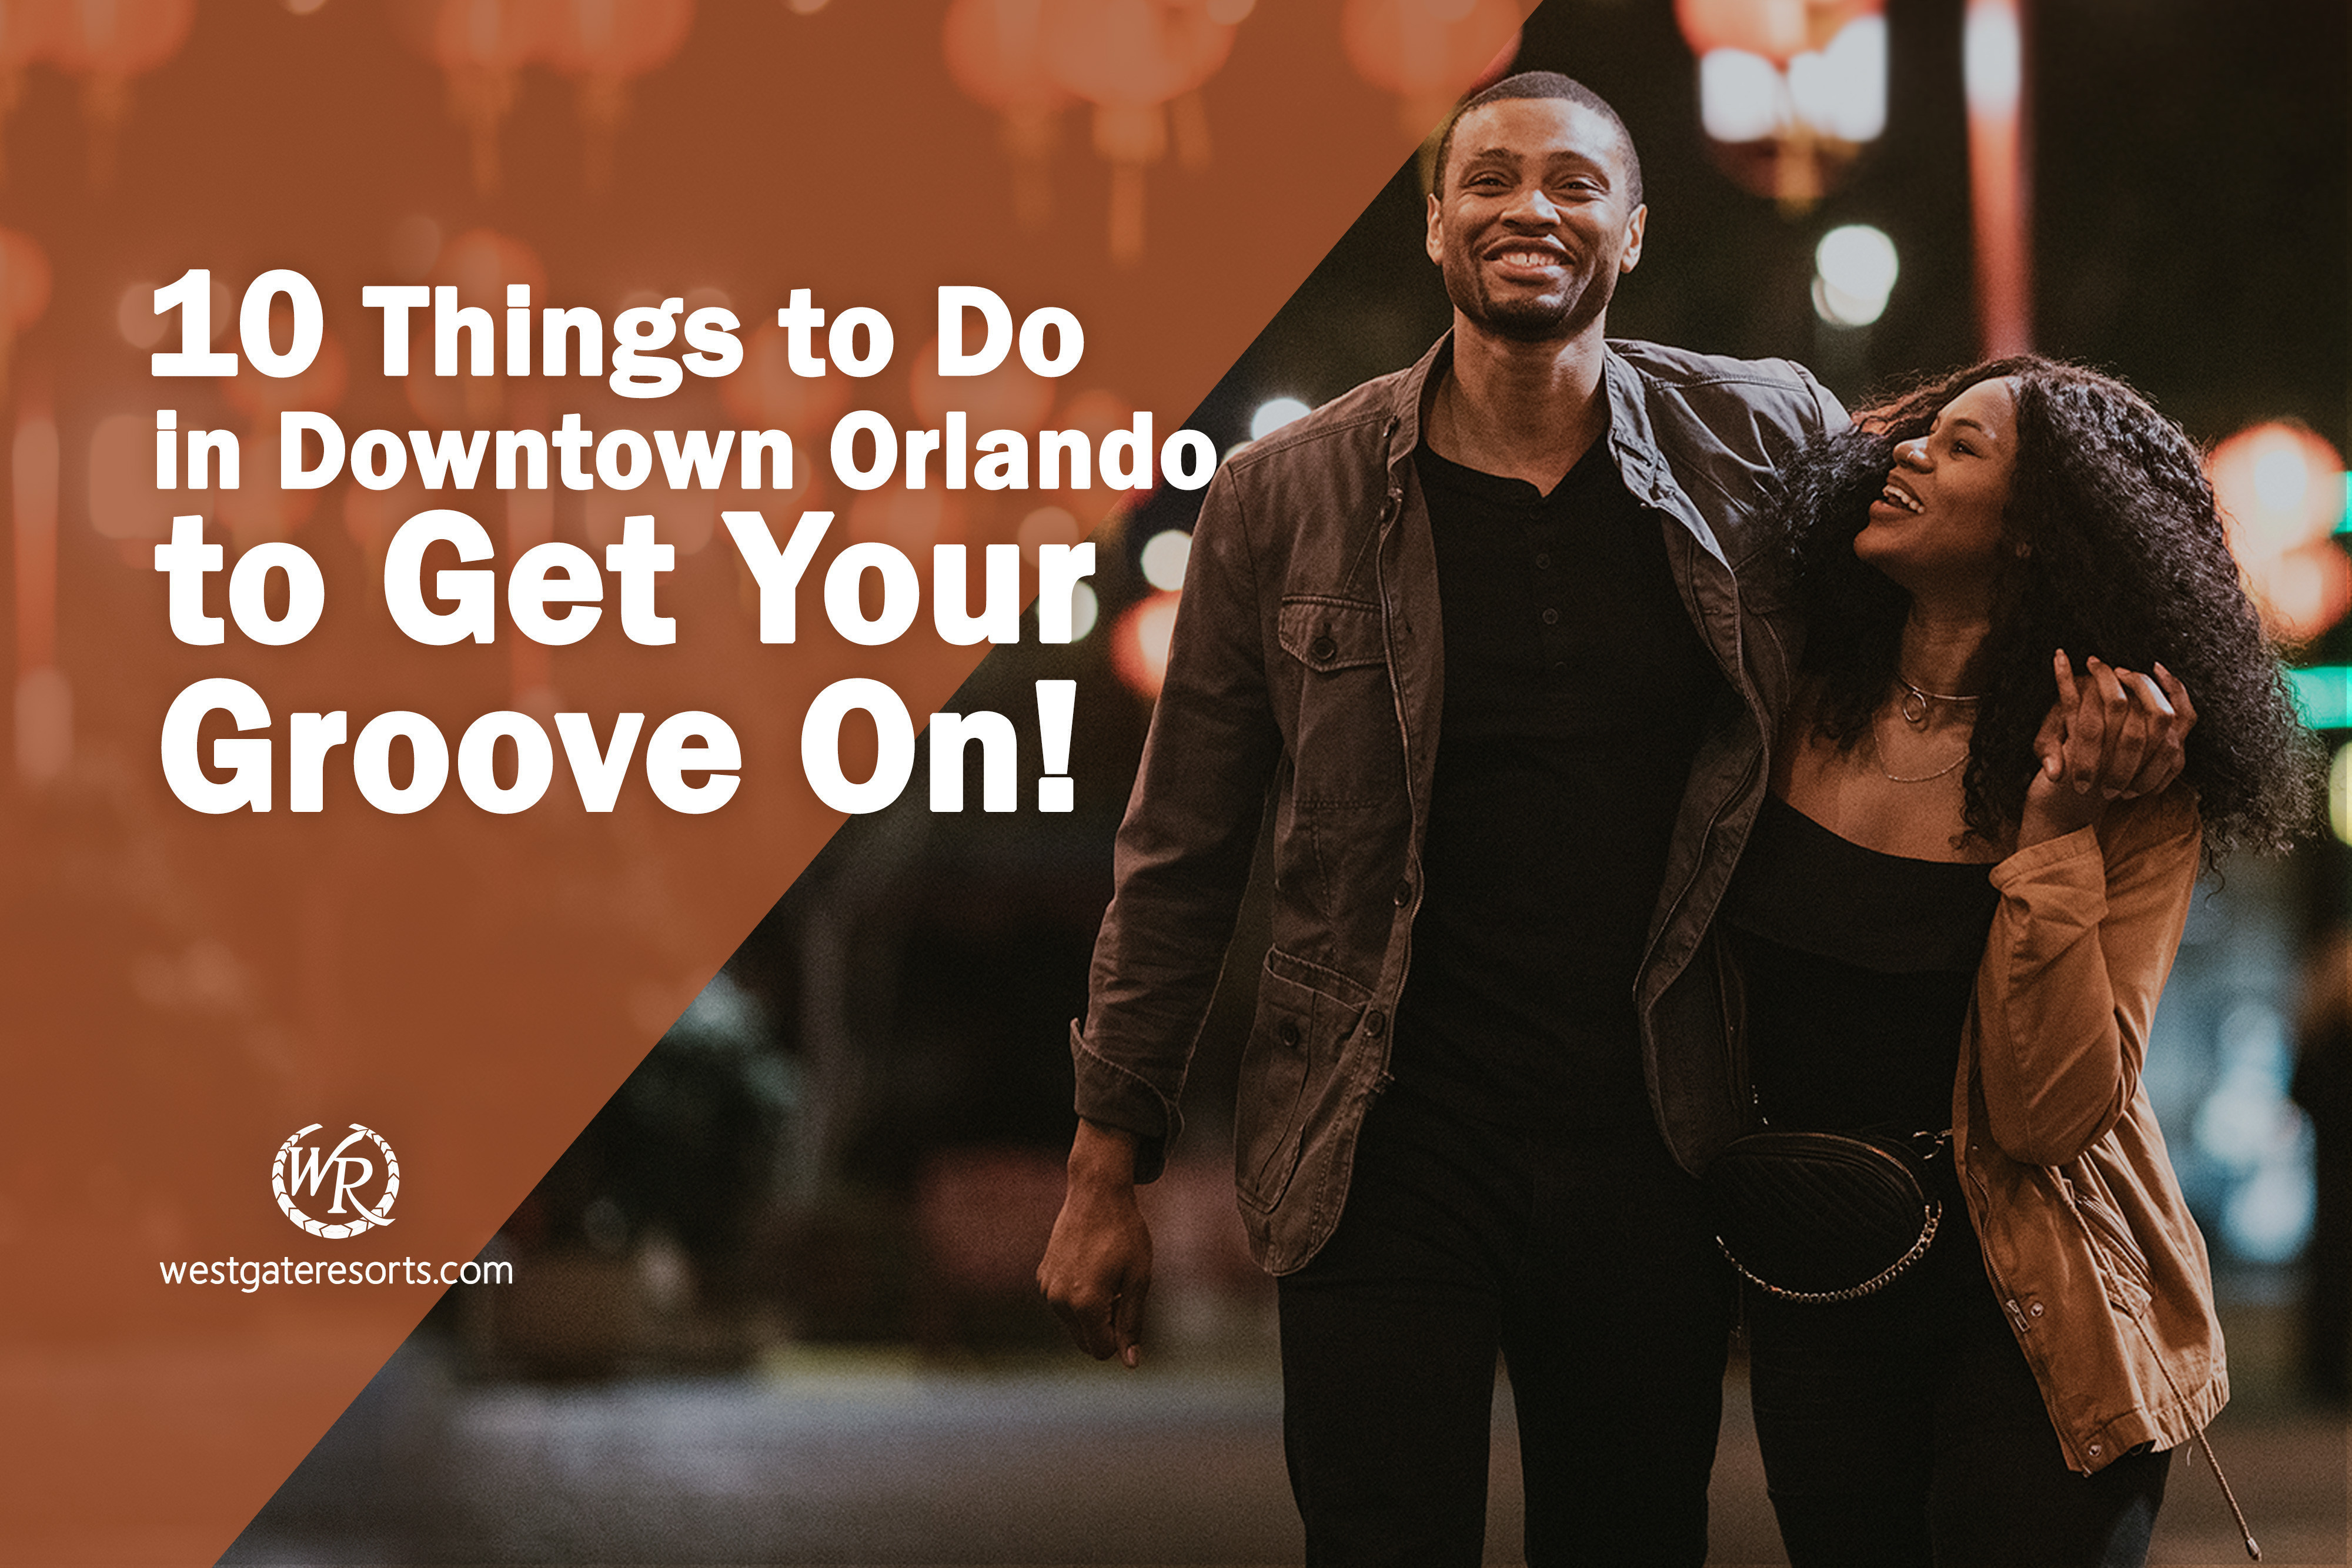 10 Things to Do in Downtown Orlando to Get Your Groove On!